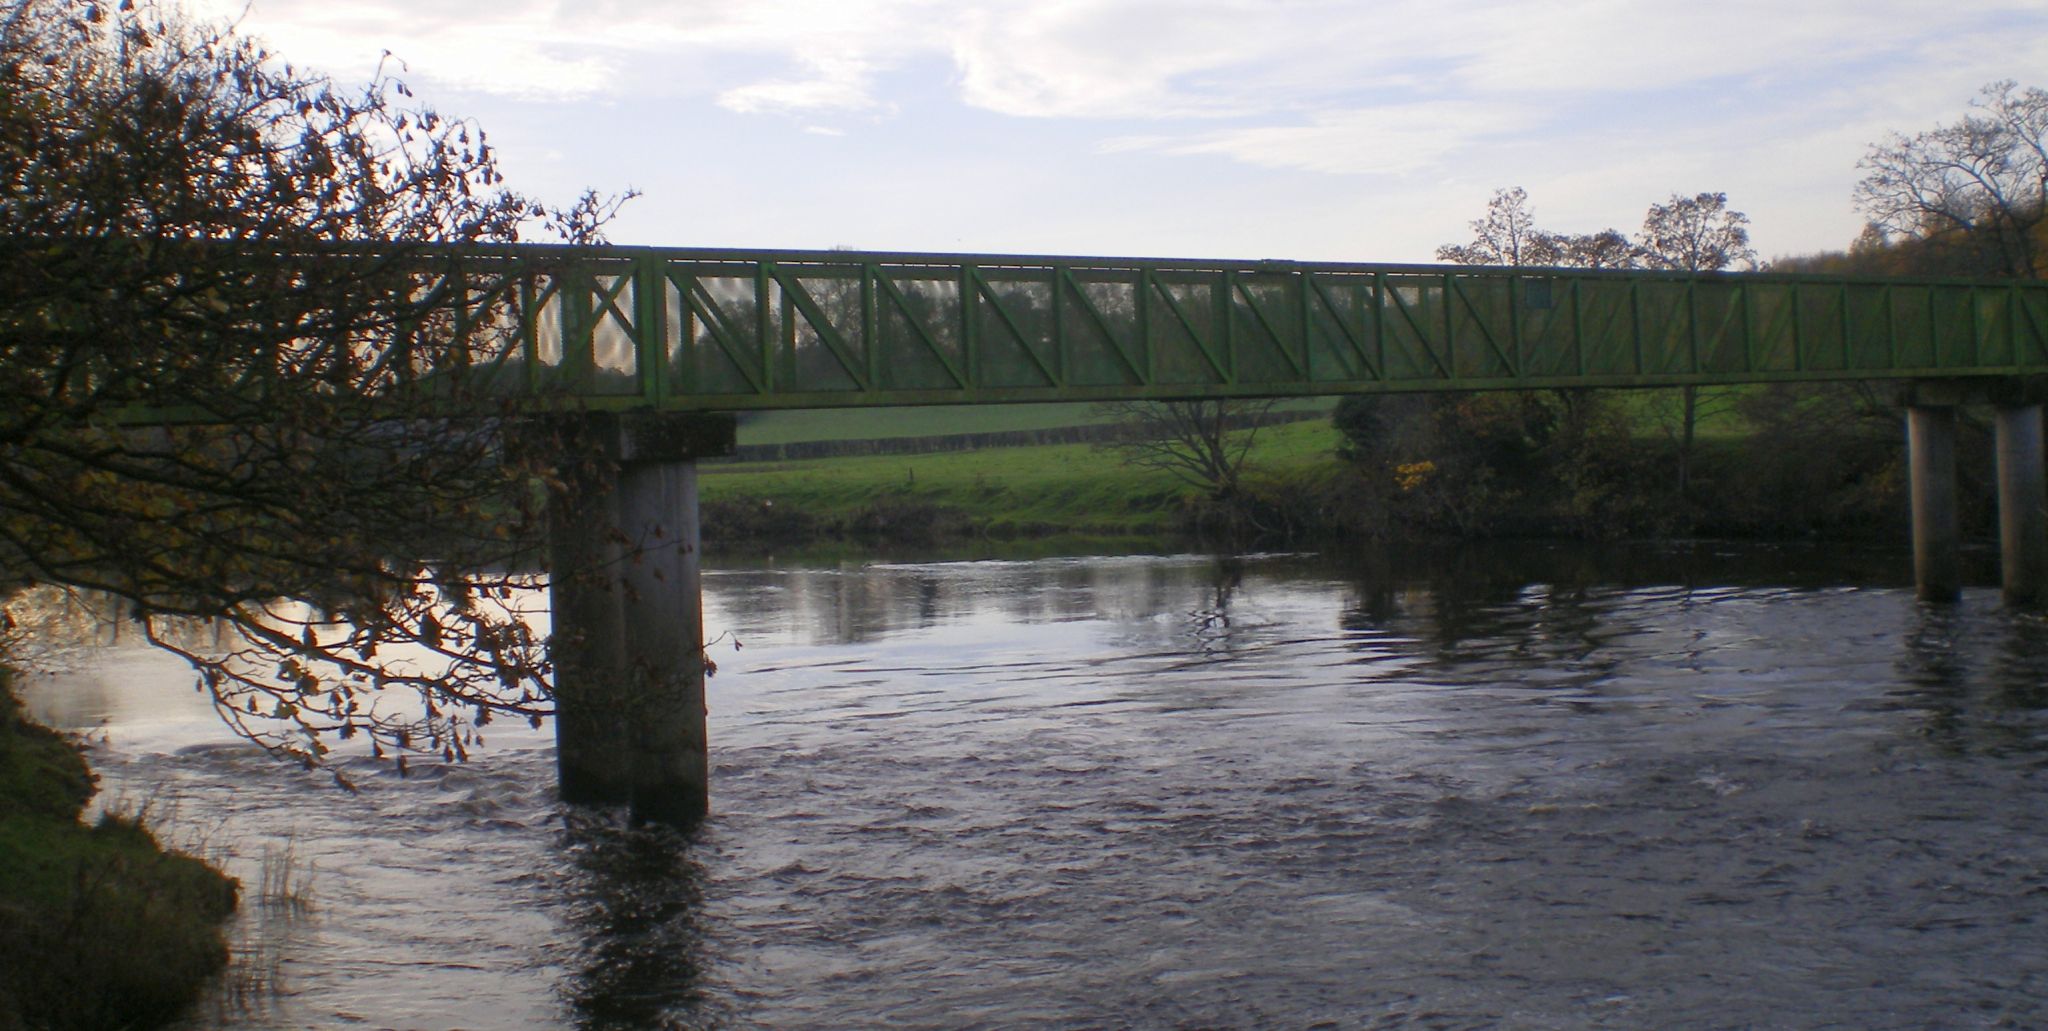 Footridge over the River Clyde near Uddingston